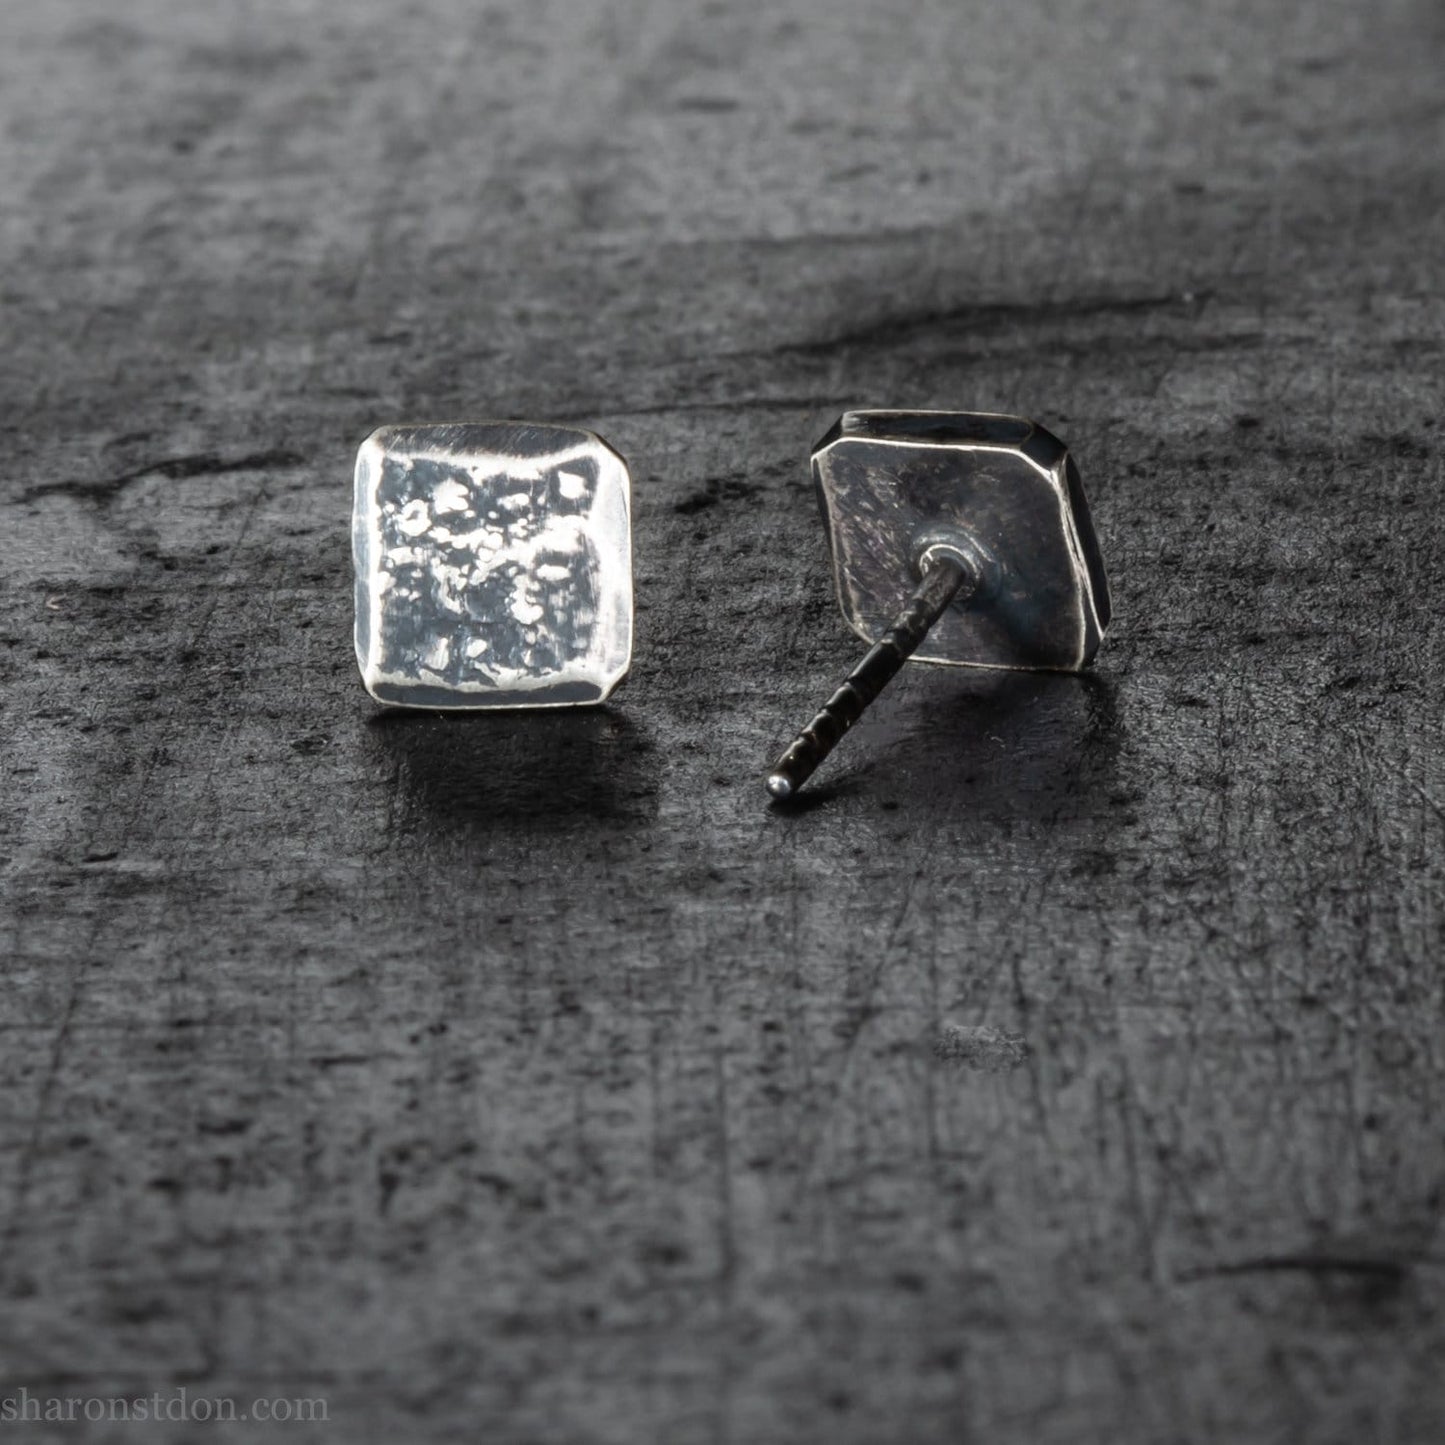 7mm square 925 sterling silver stud earrings, antiqued.